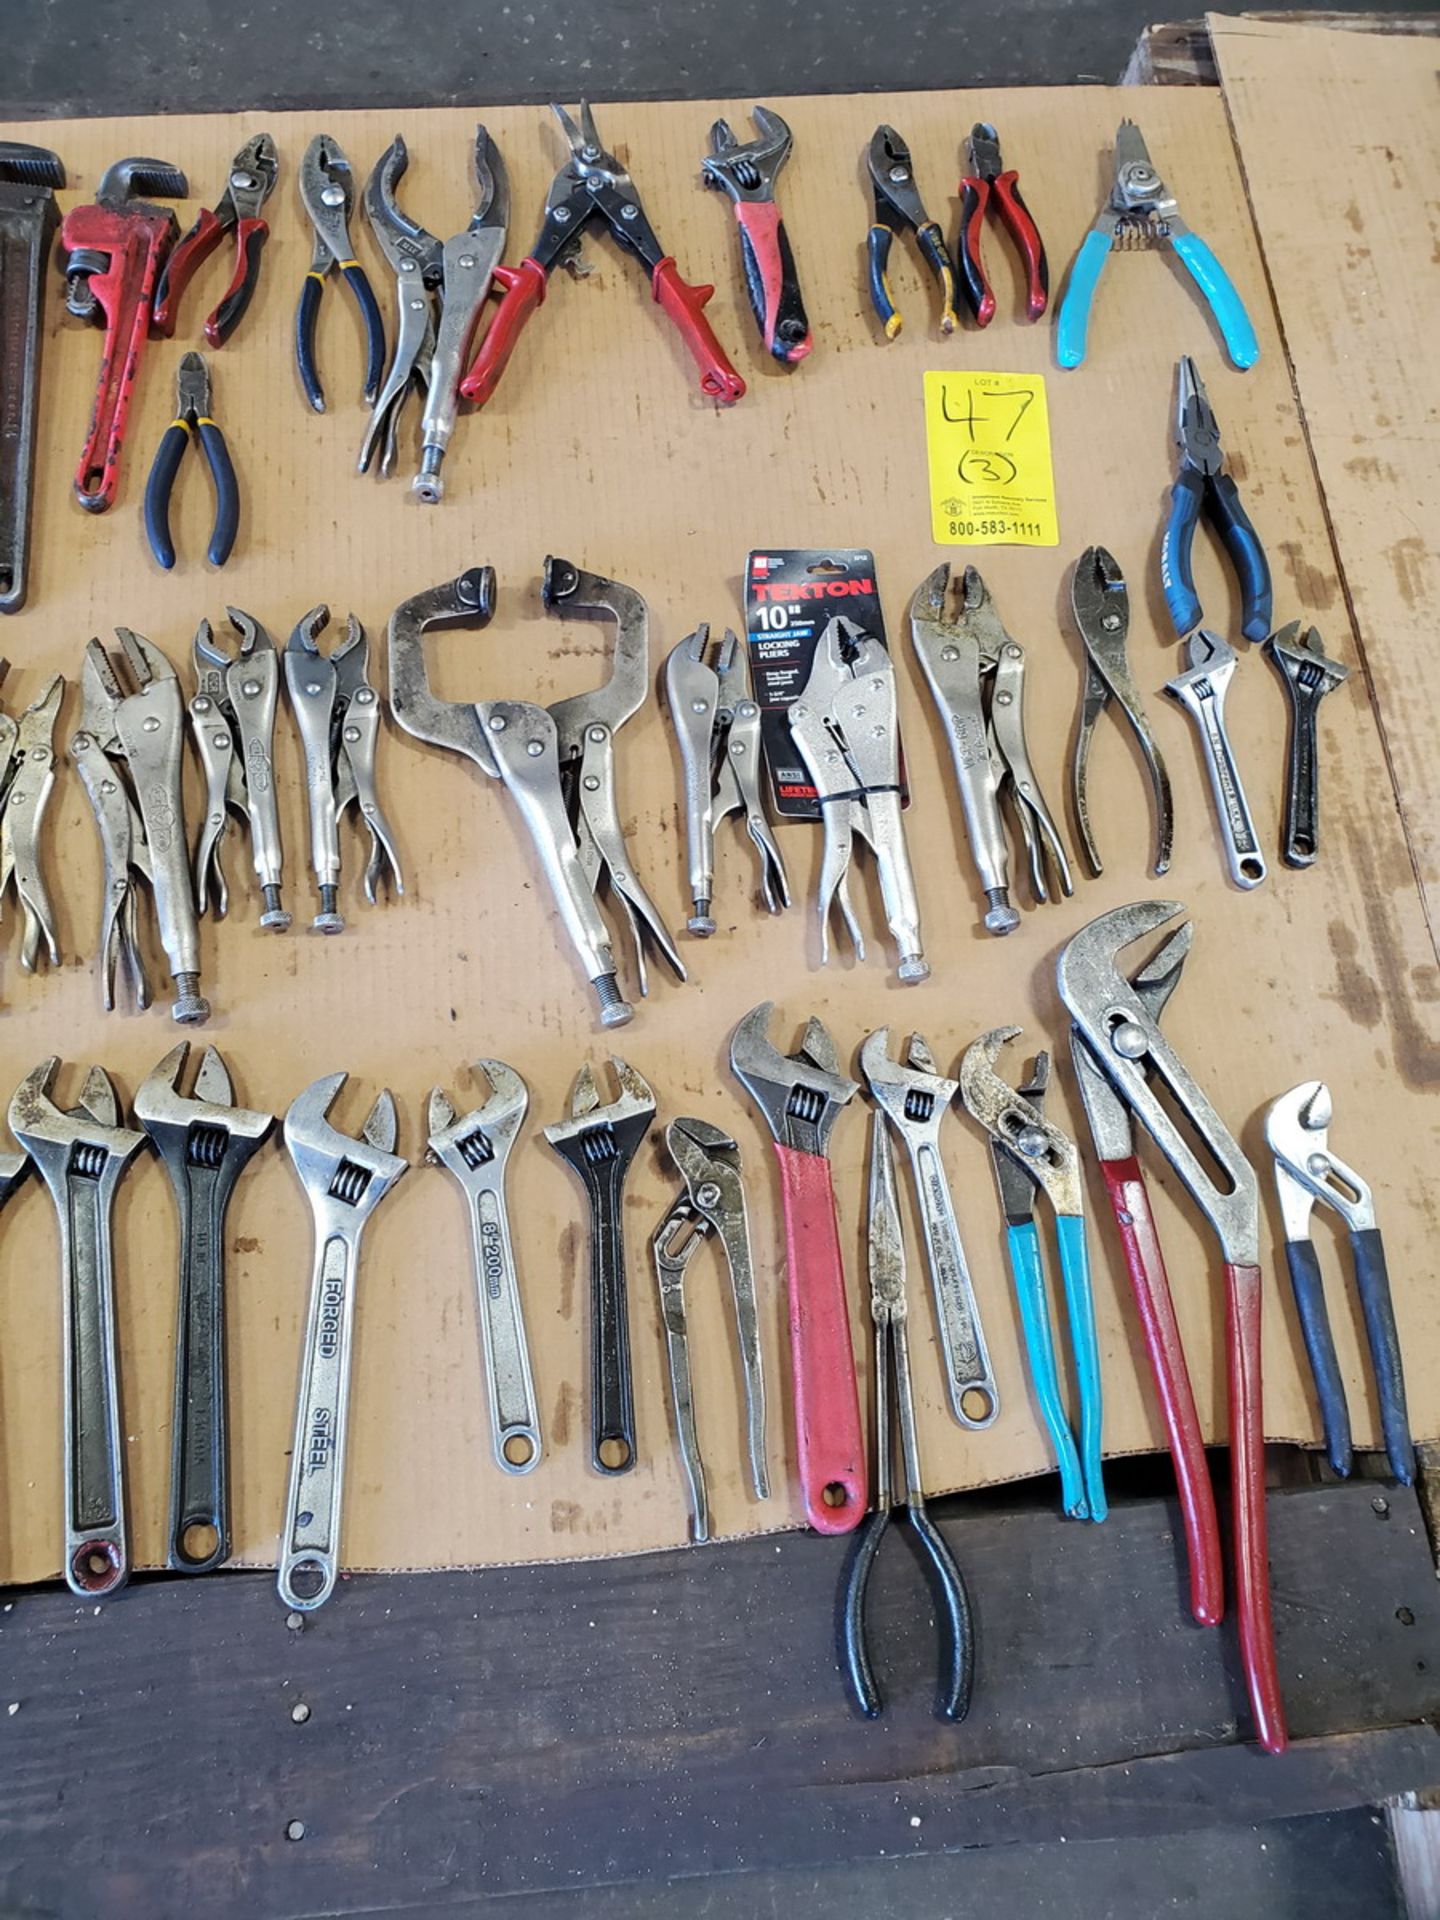 Assorted Material To Include But Not Limited To: Assorted Wrenches, C-Clamps, Assorted Pliers, etc. - Image 10 of 11